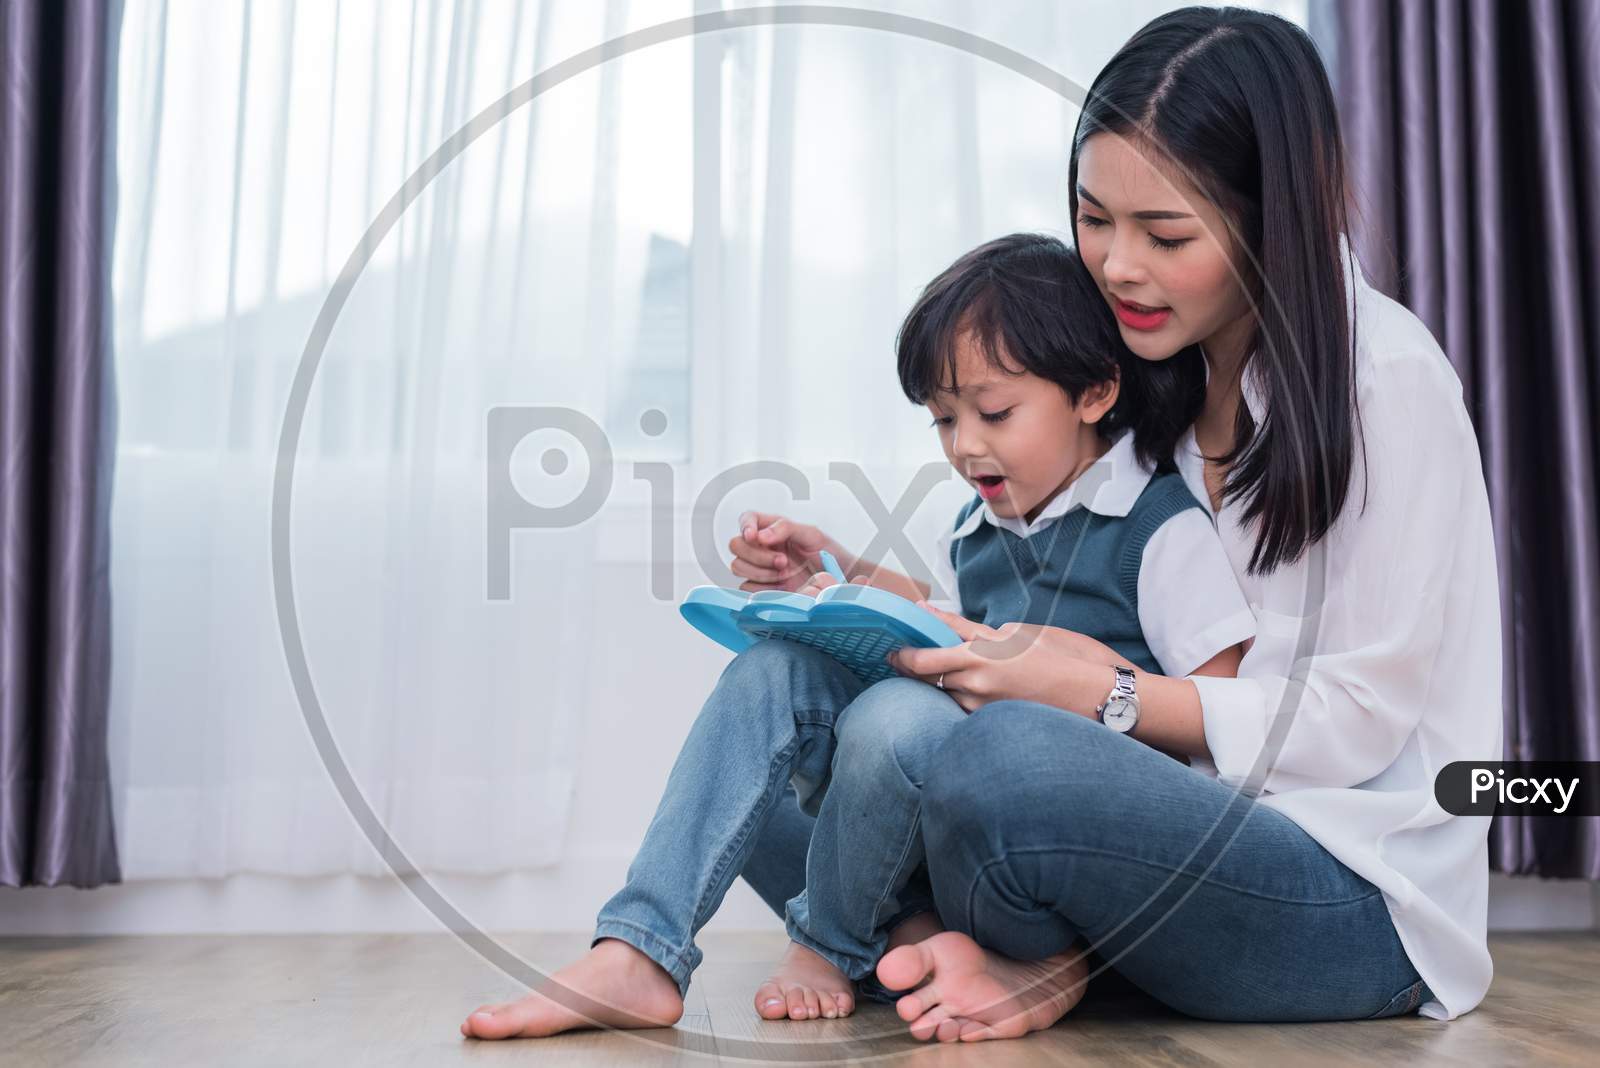 Asian Mom Teaching Cute Boy To Drawing In Chalkboard Together. Back To School And Education Concept. Family And Home Sweet Home Theme. Preschool Kids Theme.